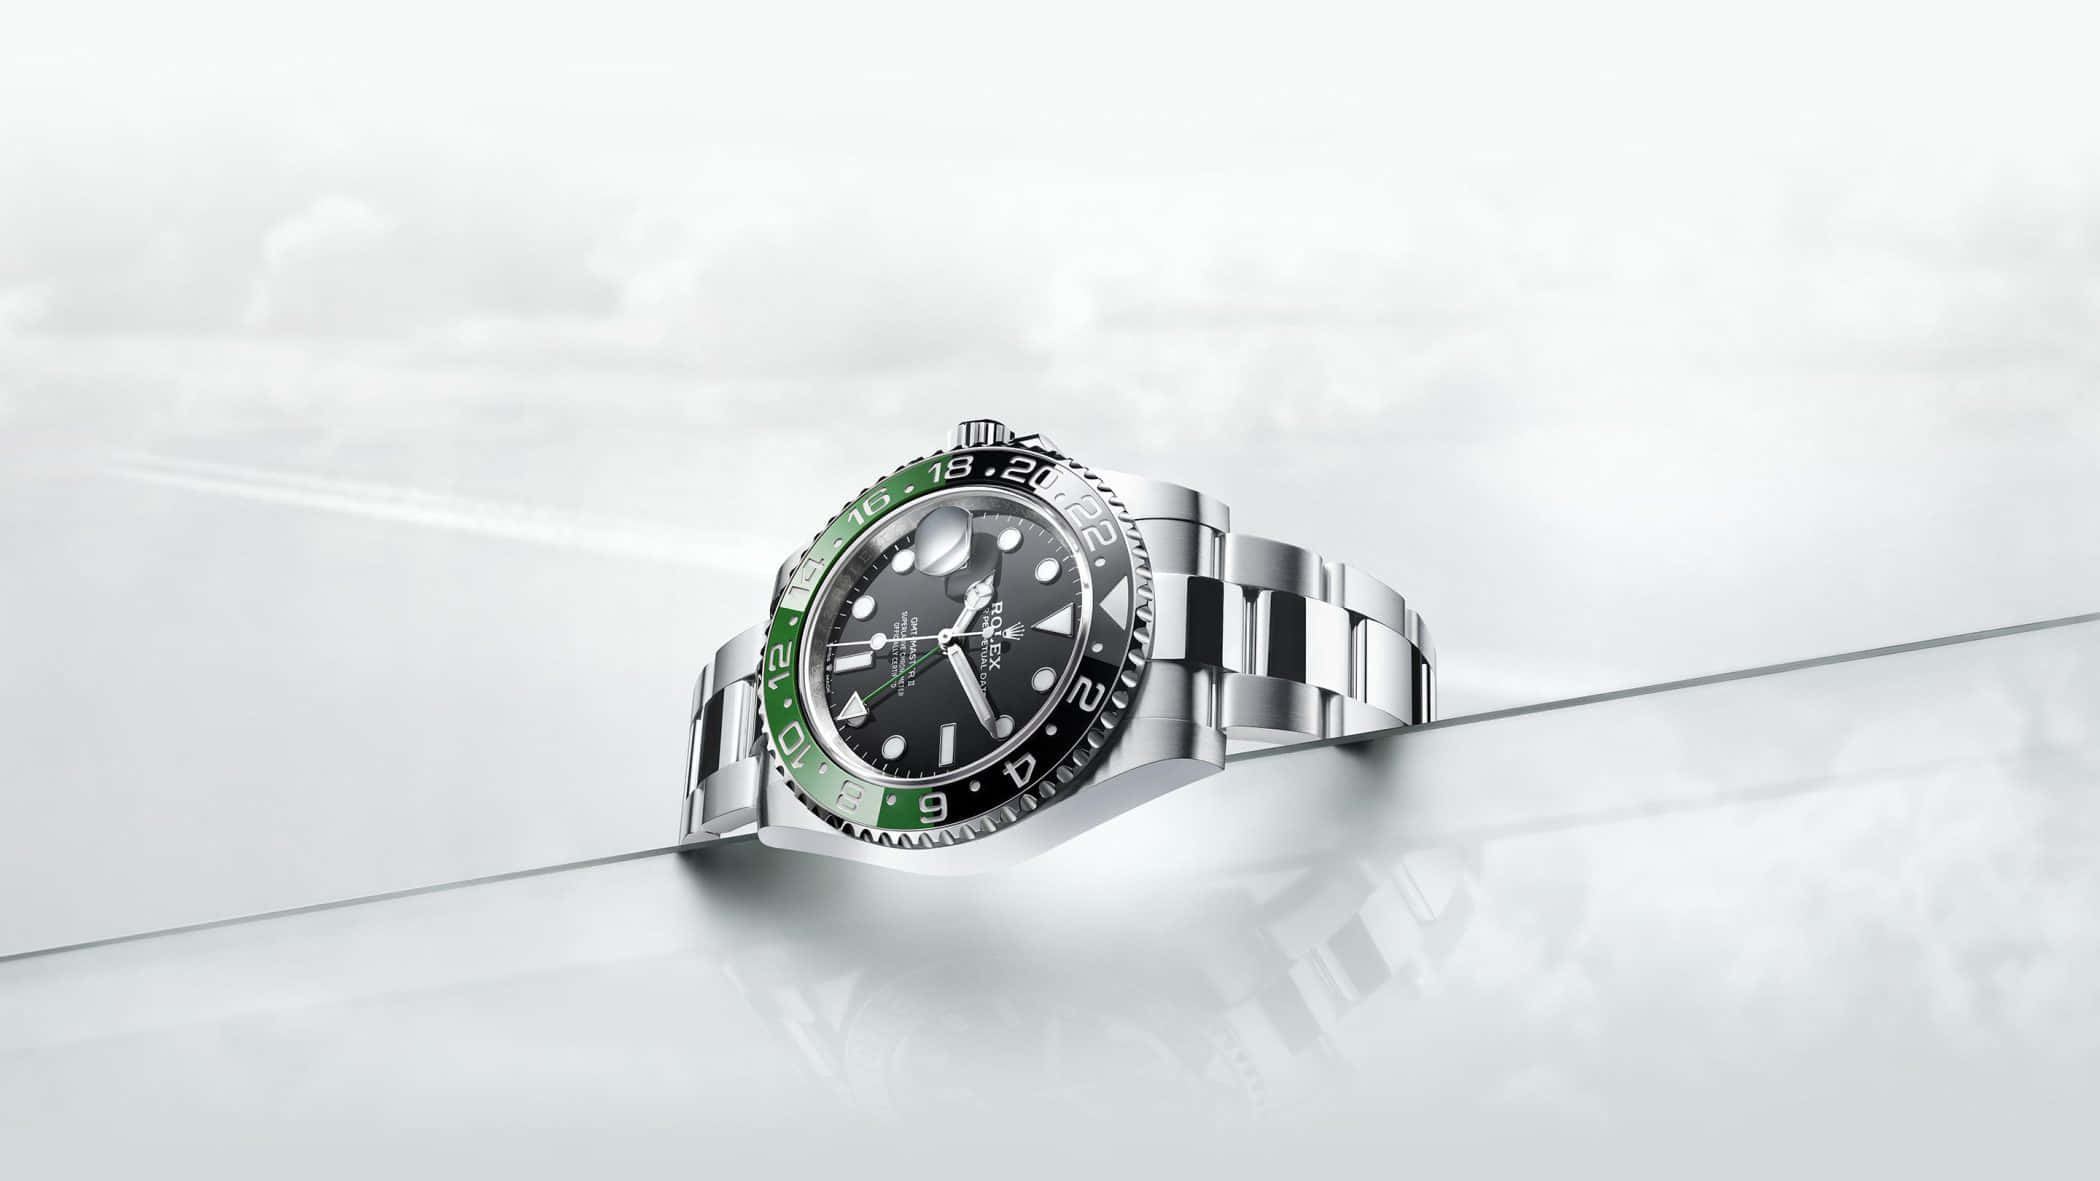 A collection of luxurious Rolex watches on display